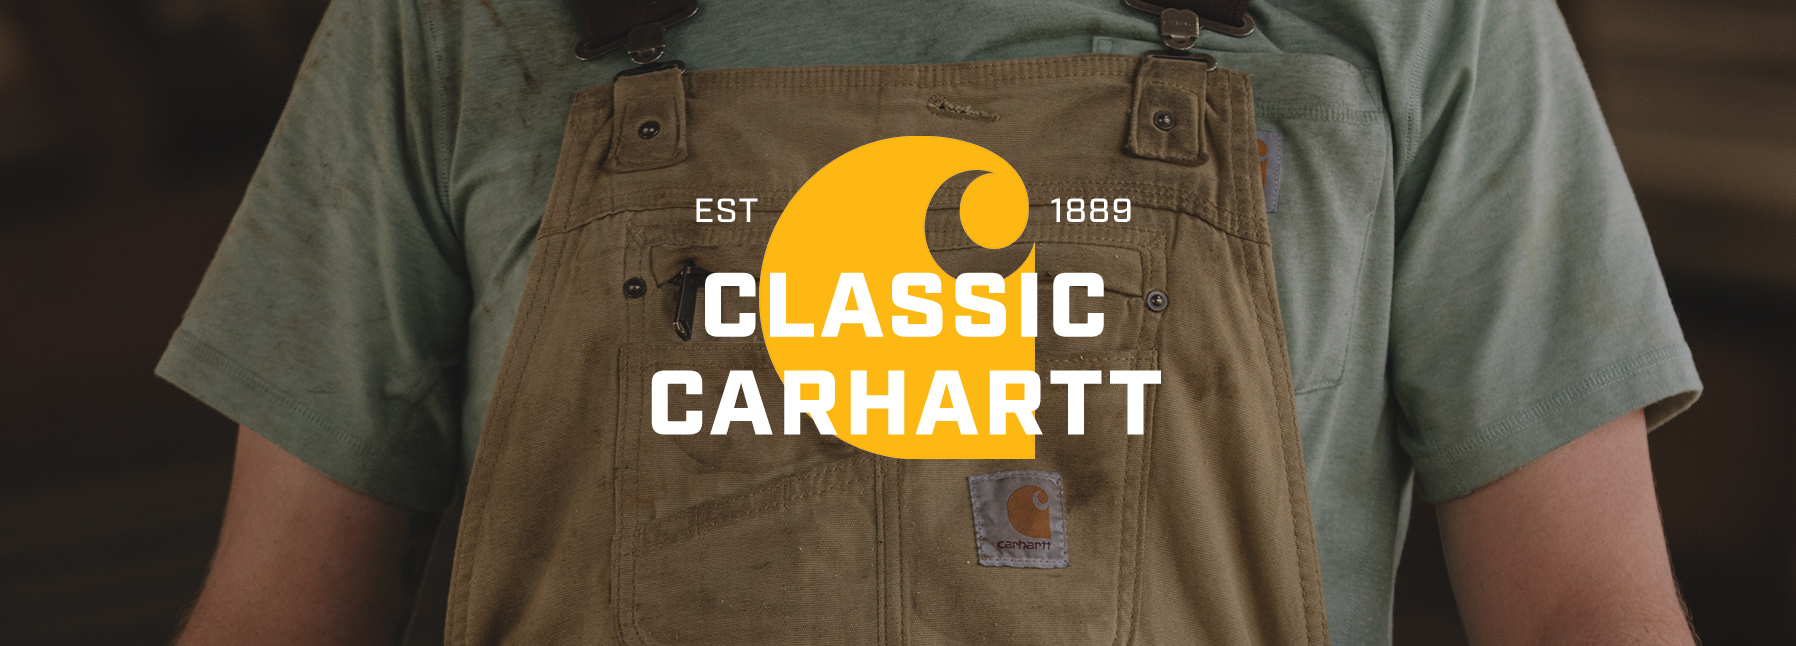 Dungarees' Gift Guide Carhartt Classics